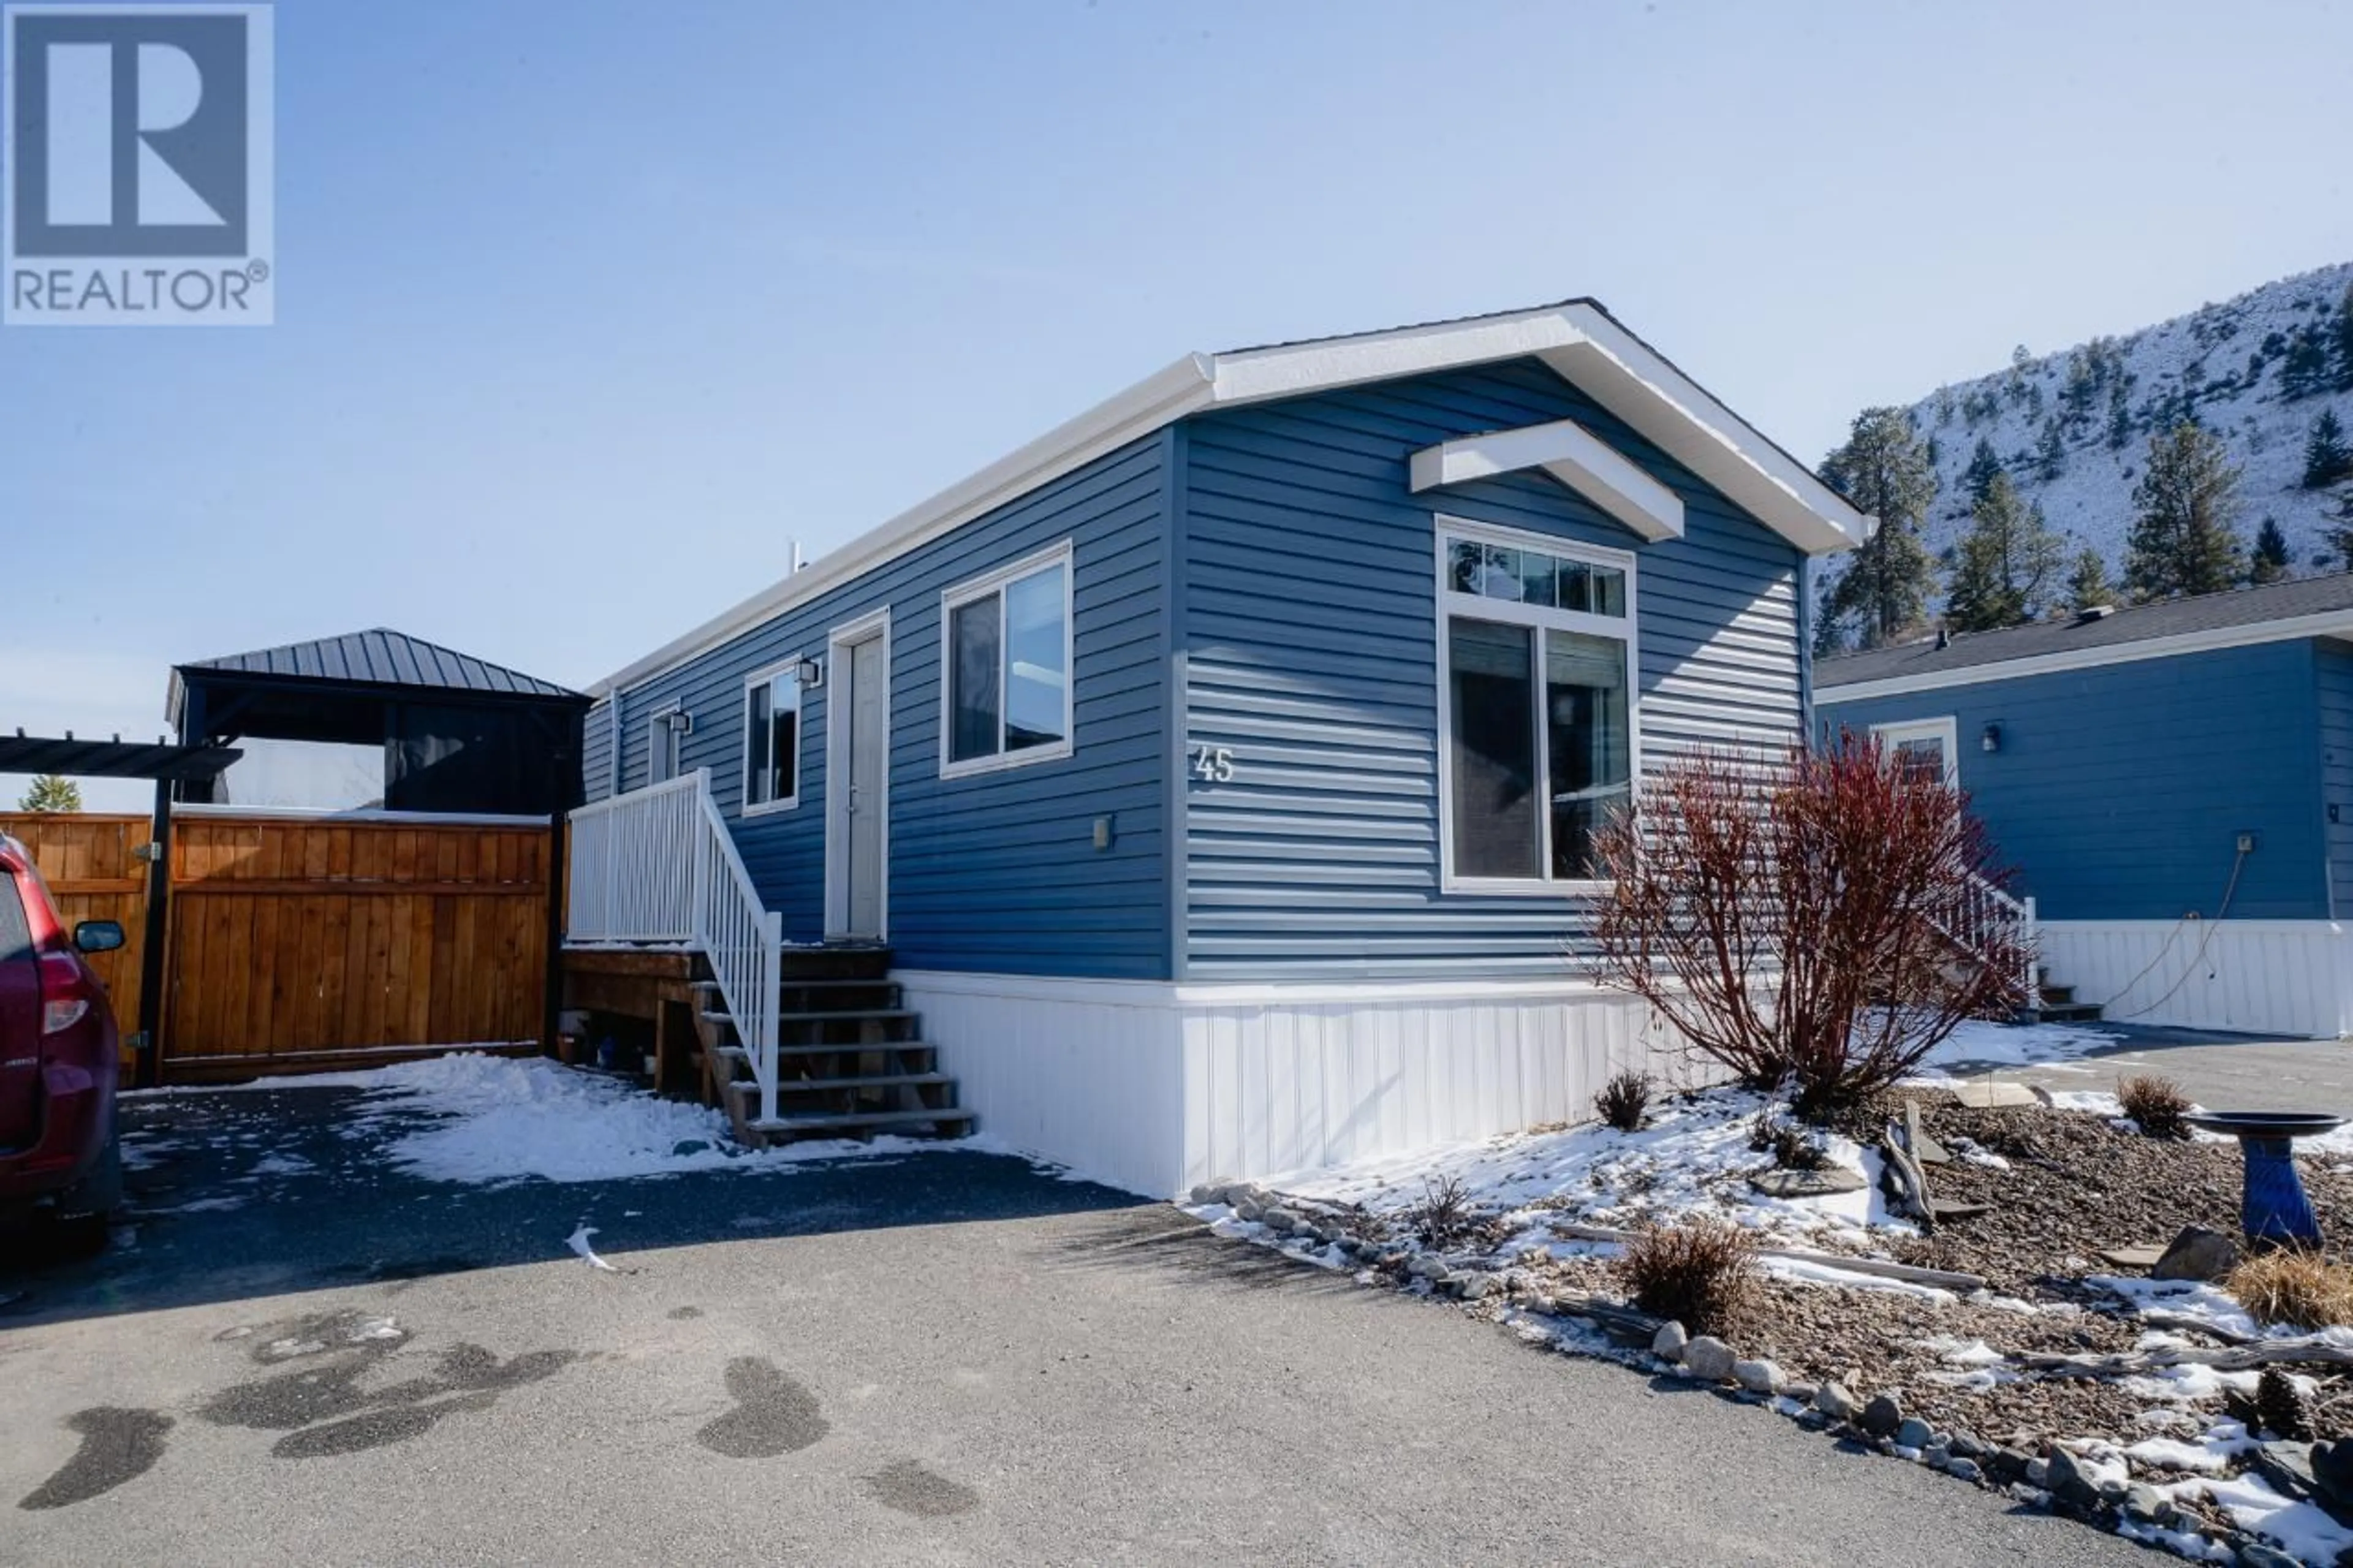 Home with vinyl exterior material for 45-7805 DALLAS DRIVE, Kamloops British Columbia V2C0E5